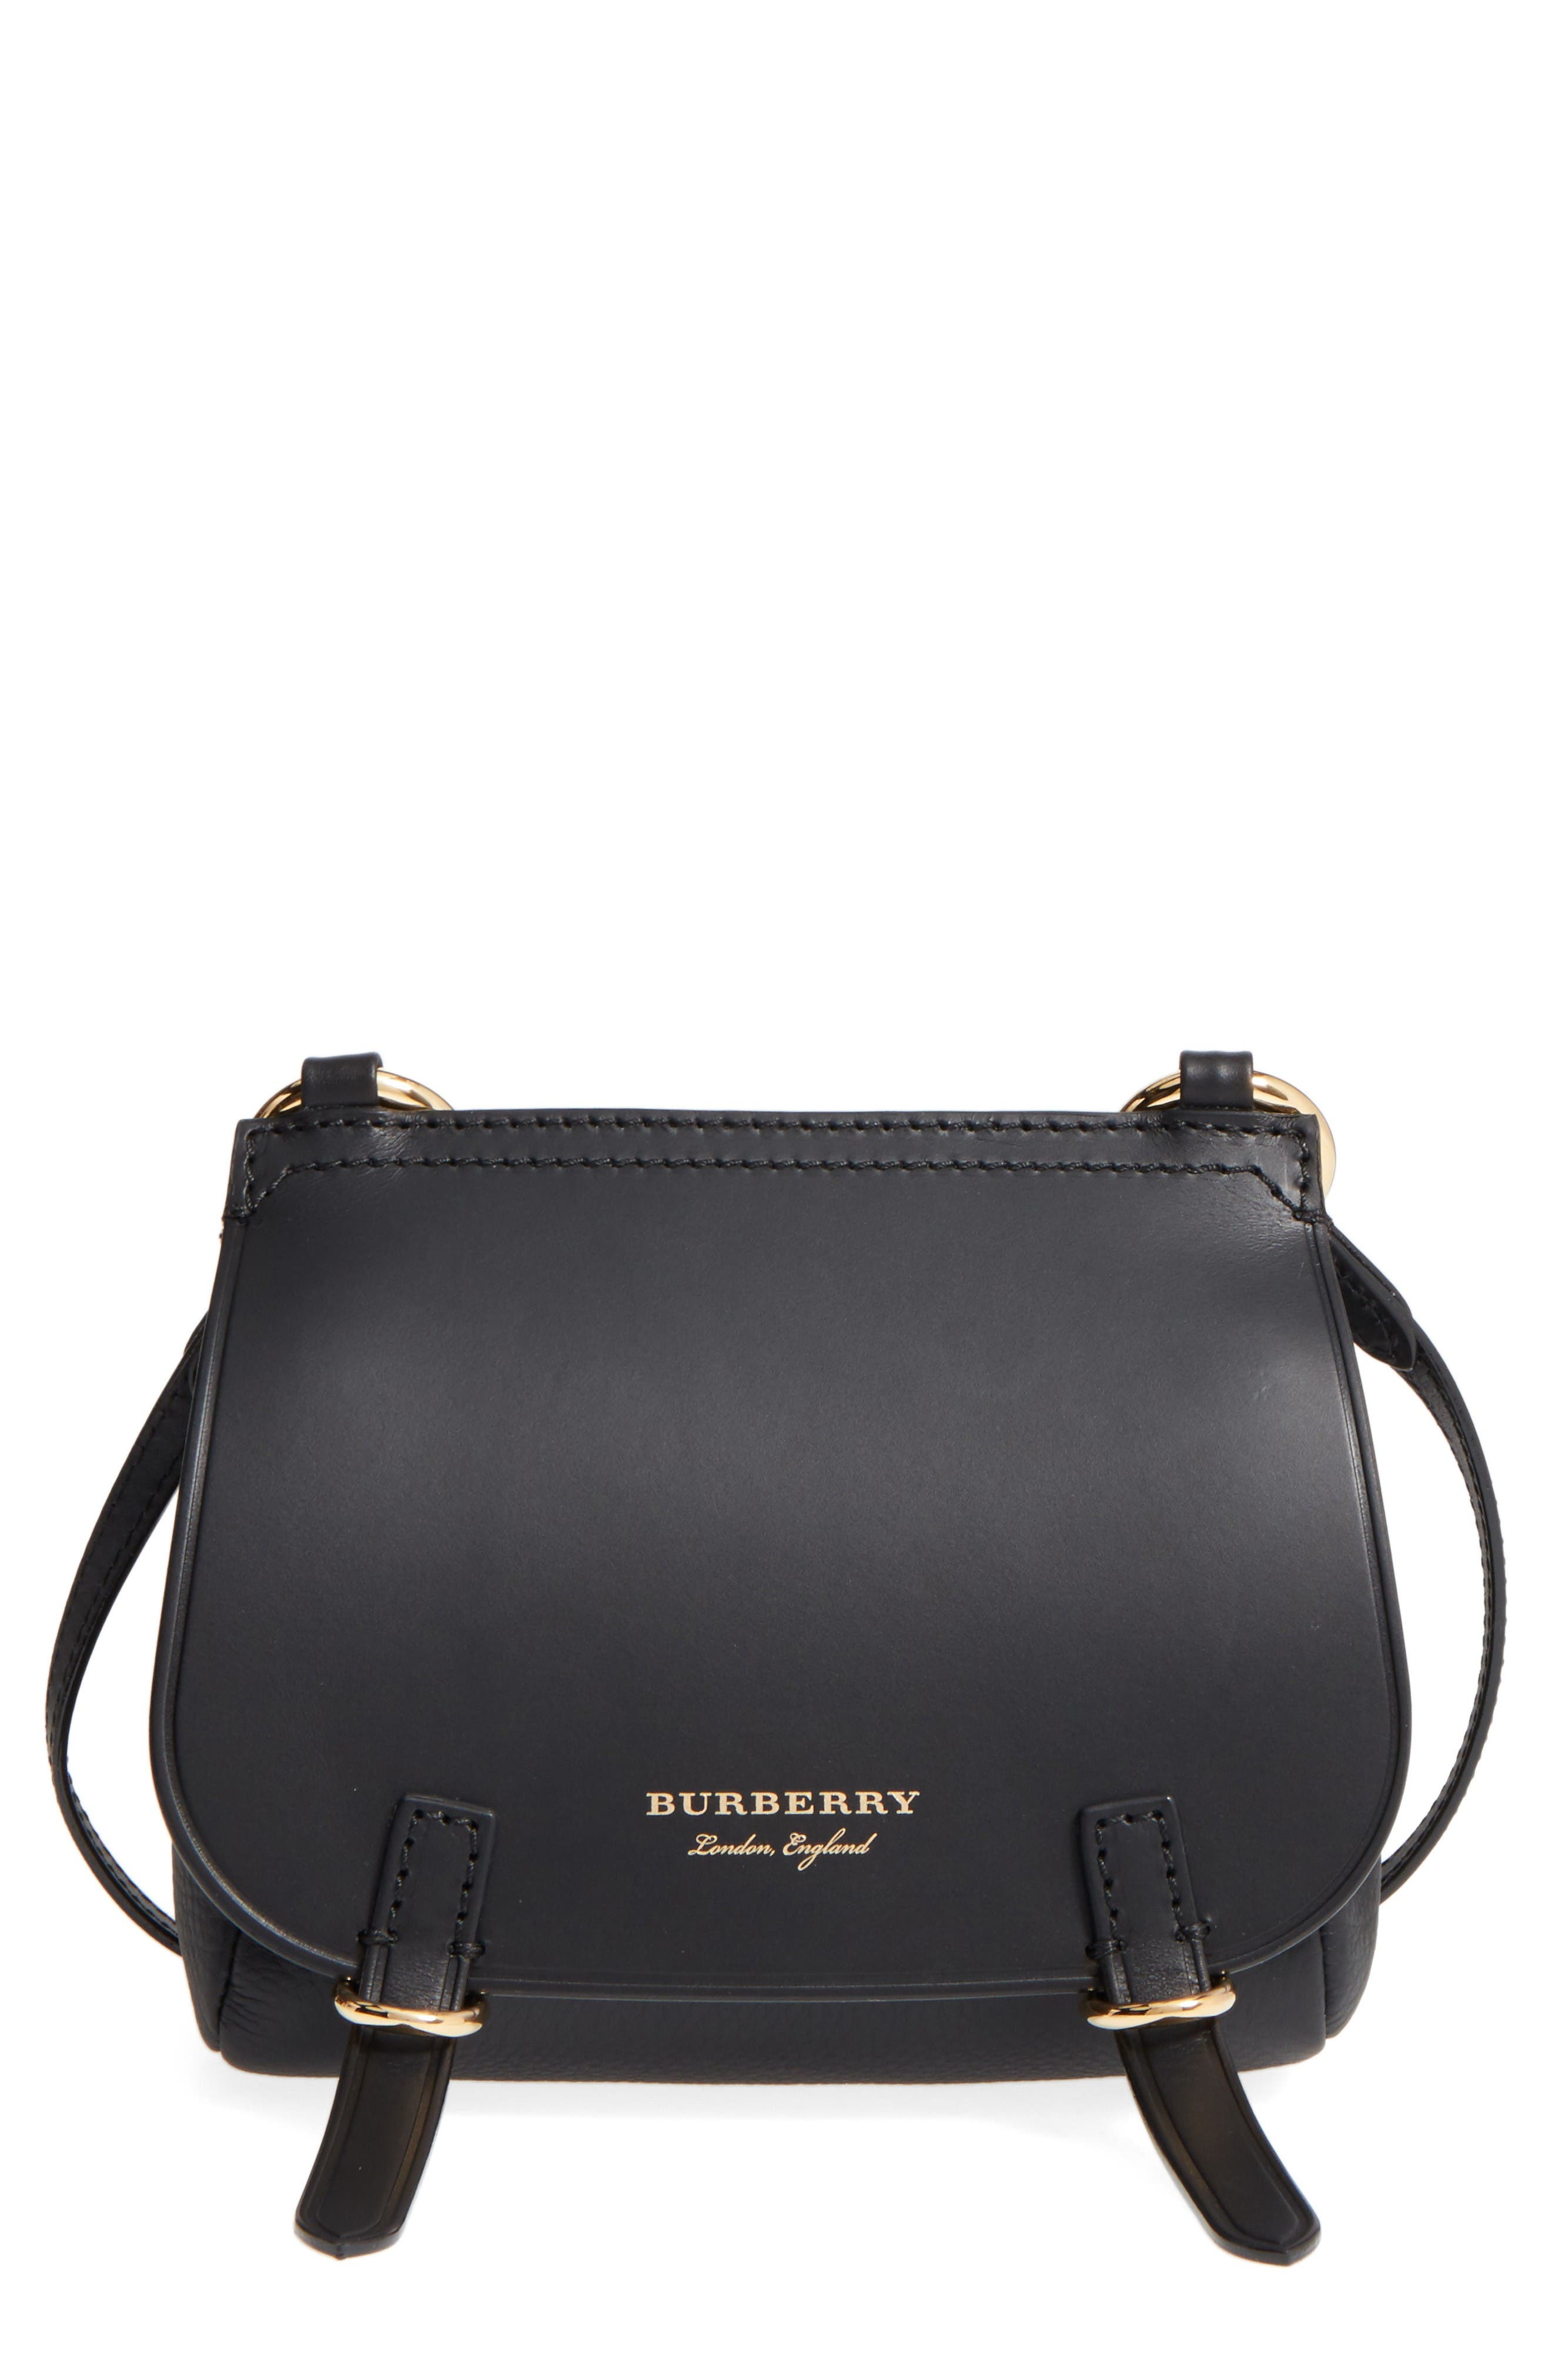 burberry bags price in usa